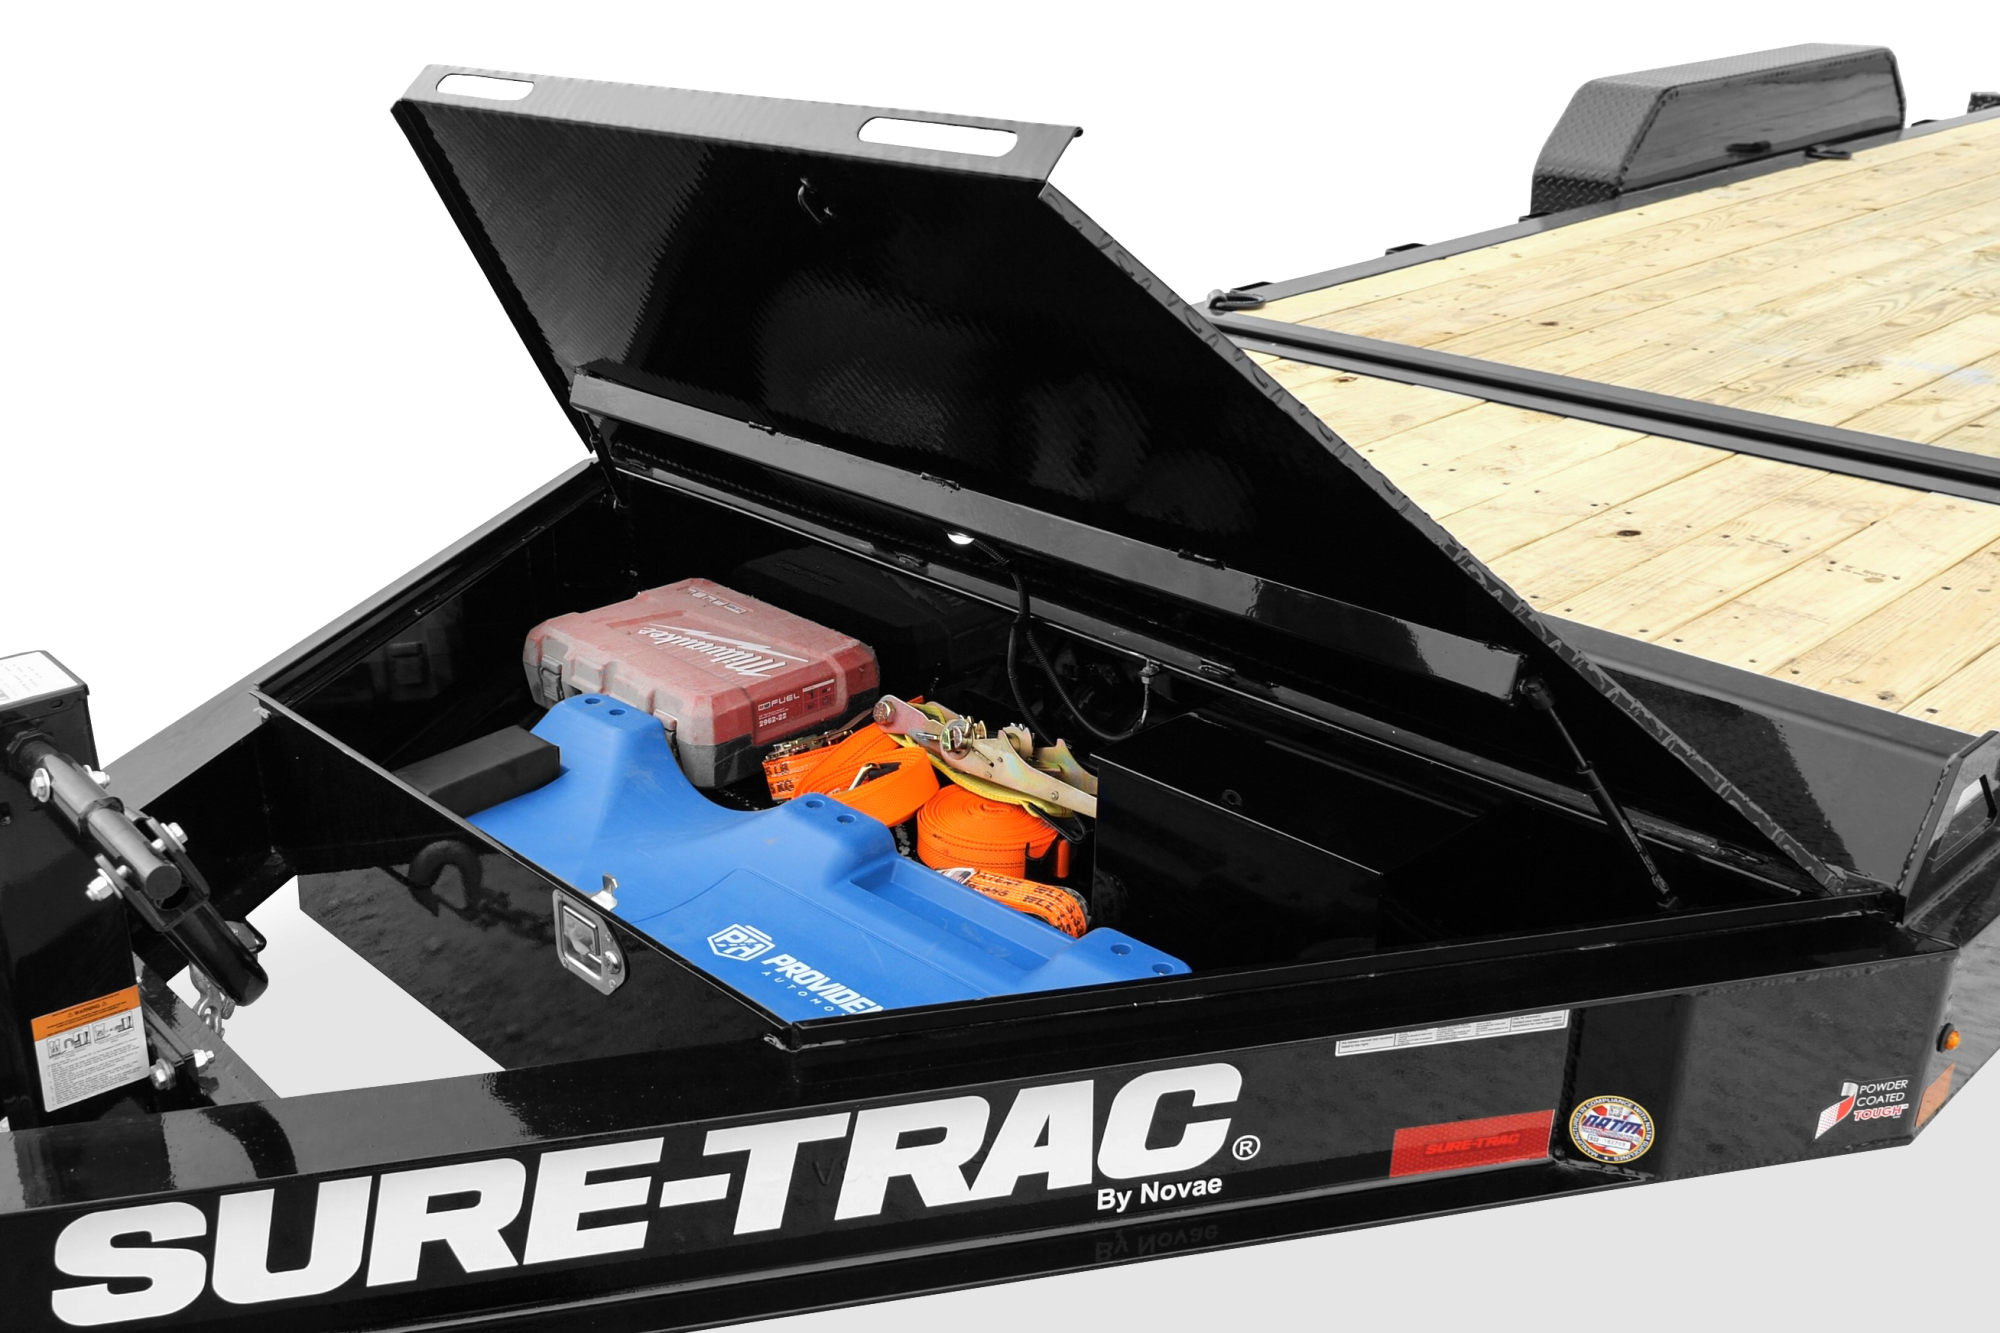 Sure-Trac | Pro Series tilt Bed Trailer | Image | Front side, tilted, Pro Series Tilt Bed Trailer with reflective tape, close-up of toolbox, open